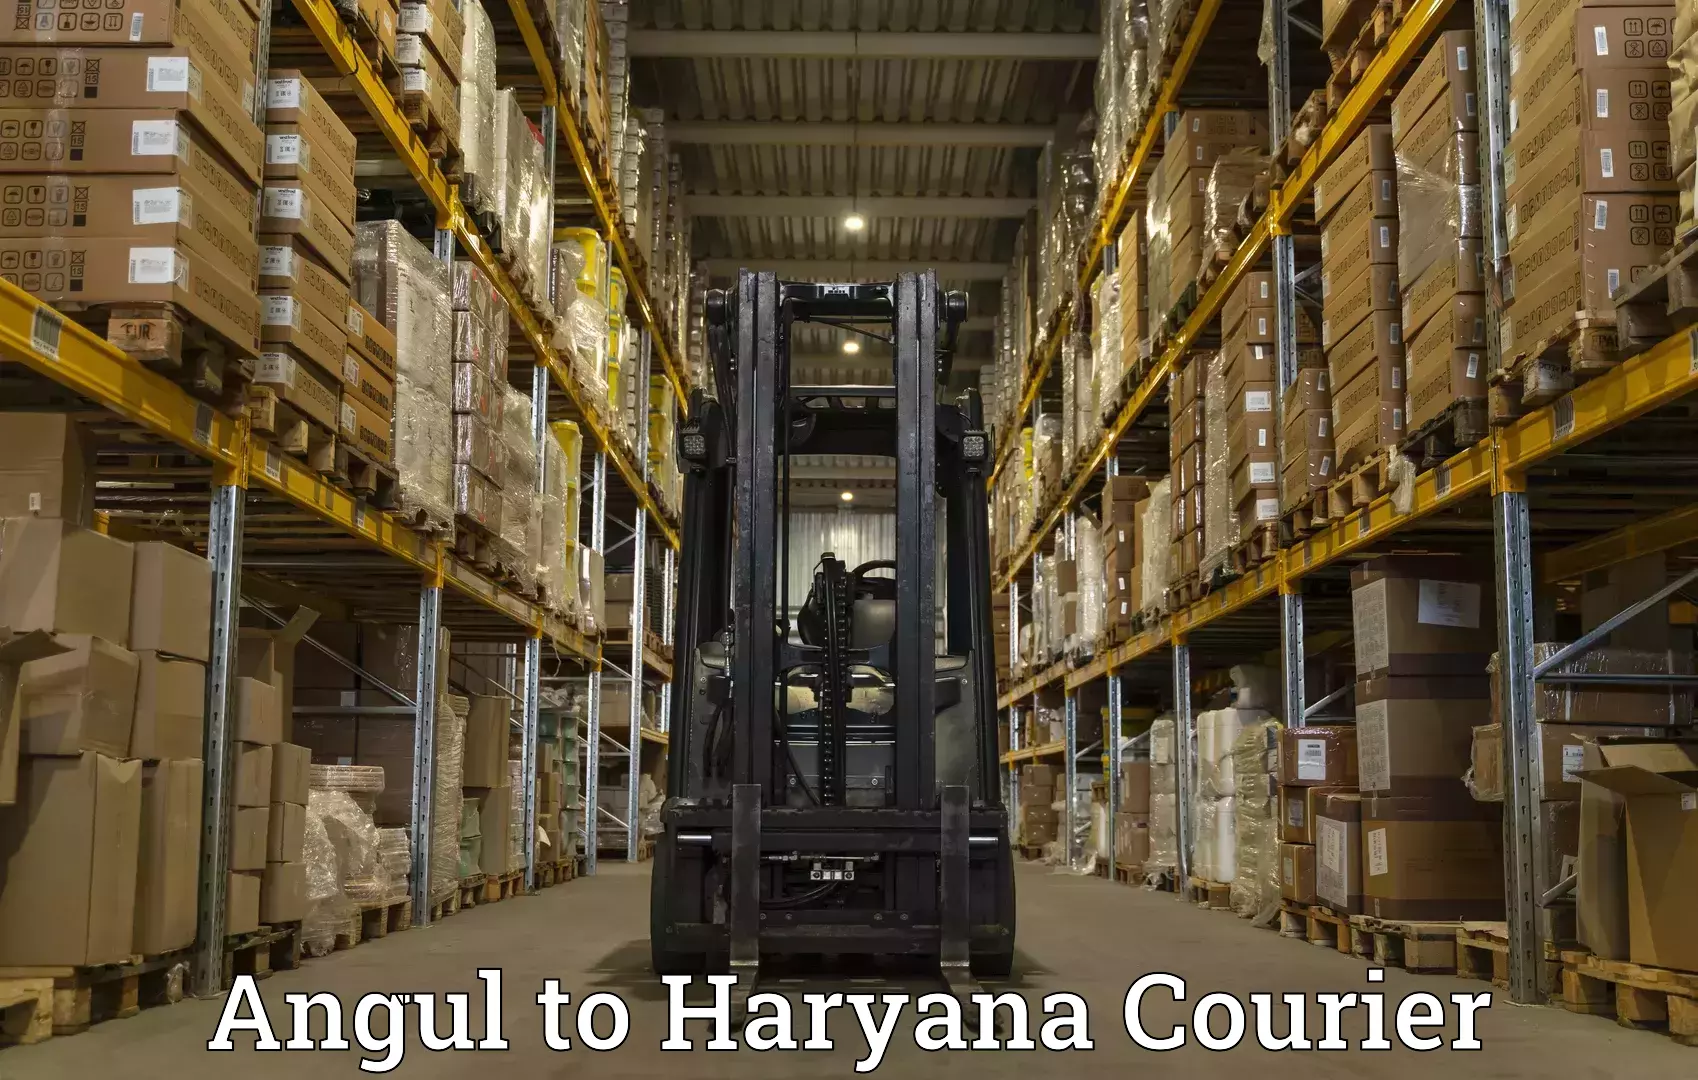 Customer-oriented courier services Angul to Bilaspur Haryana